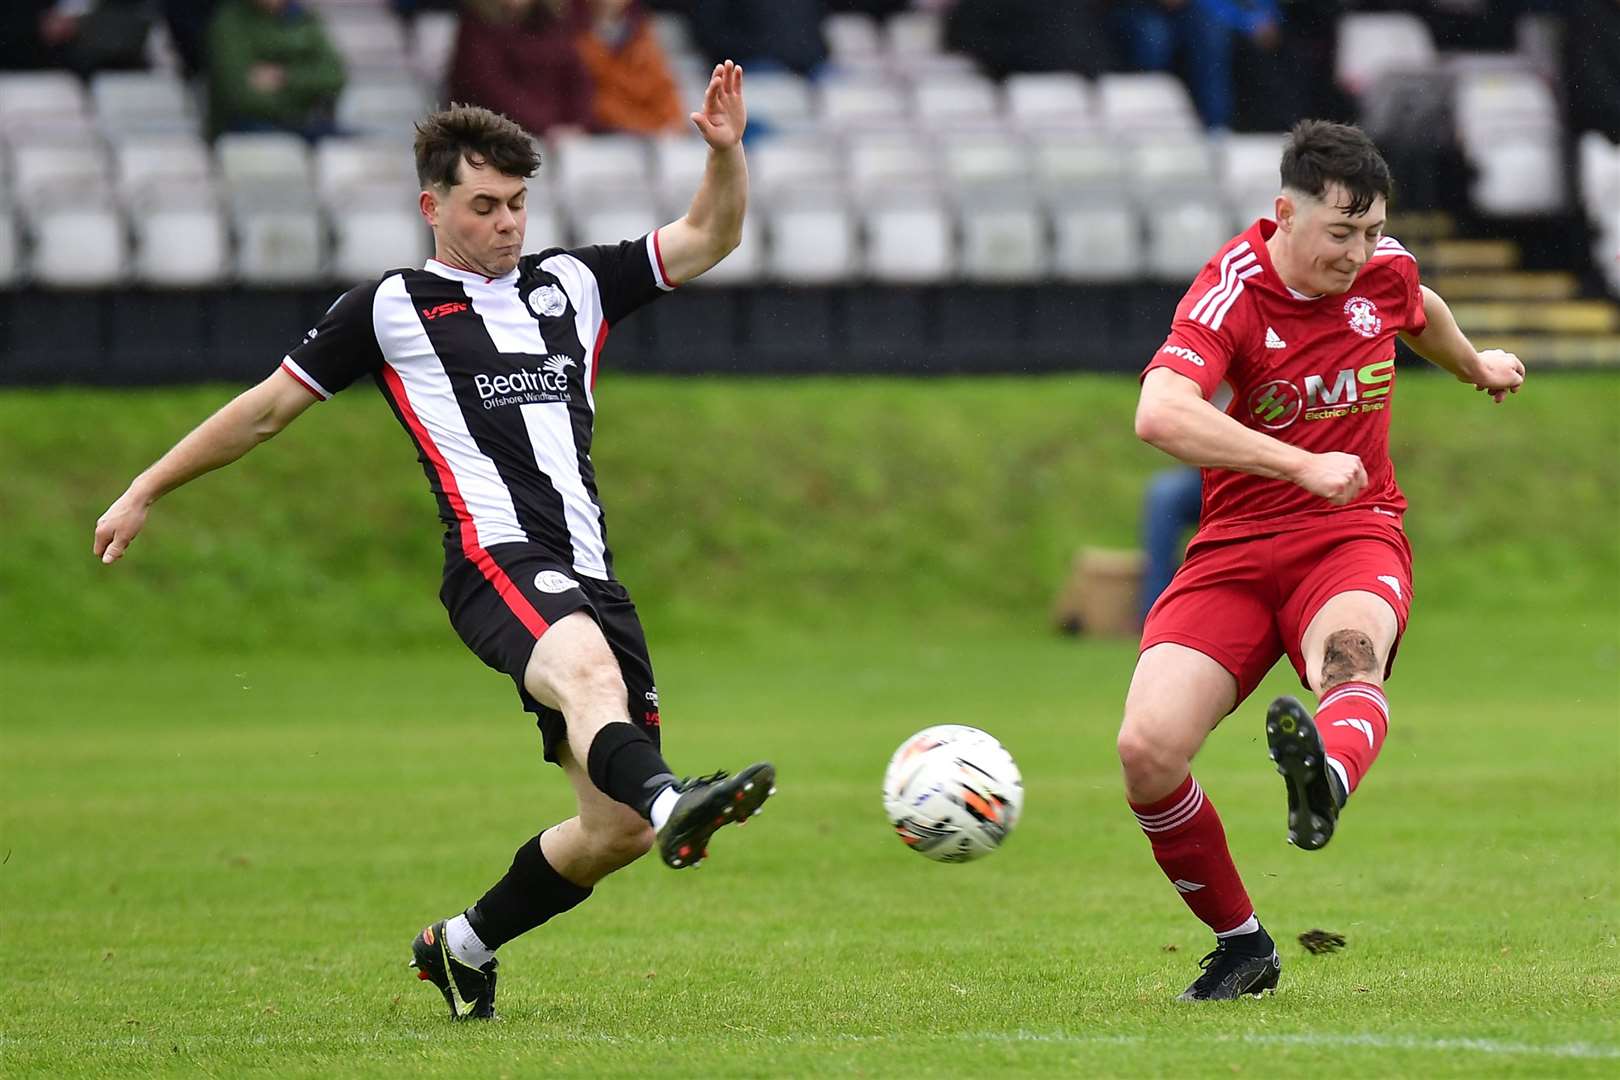 Marc Coghill attempts to block a shot from Lossiemouth's Henry Jordan. Picture: Mel Roger